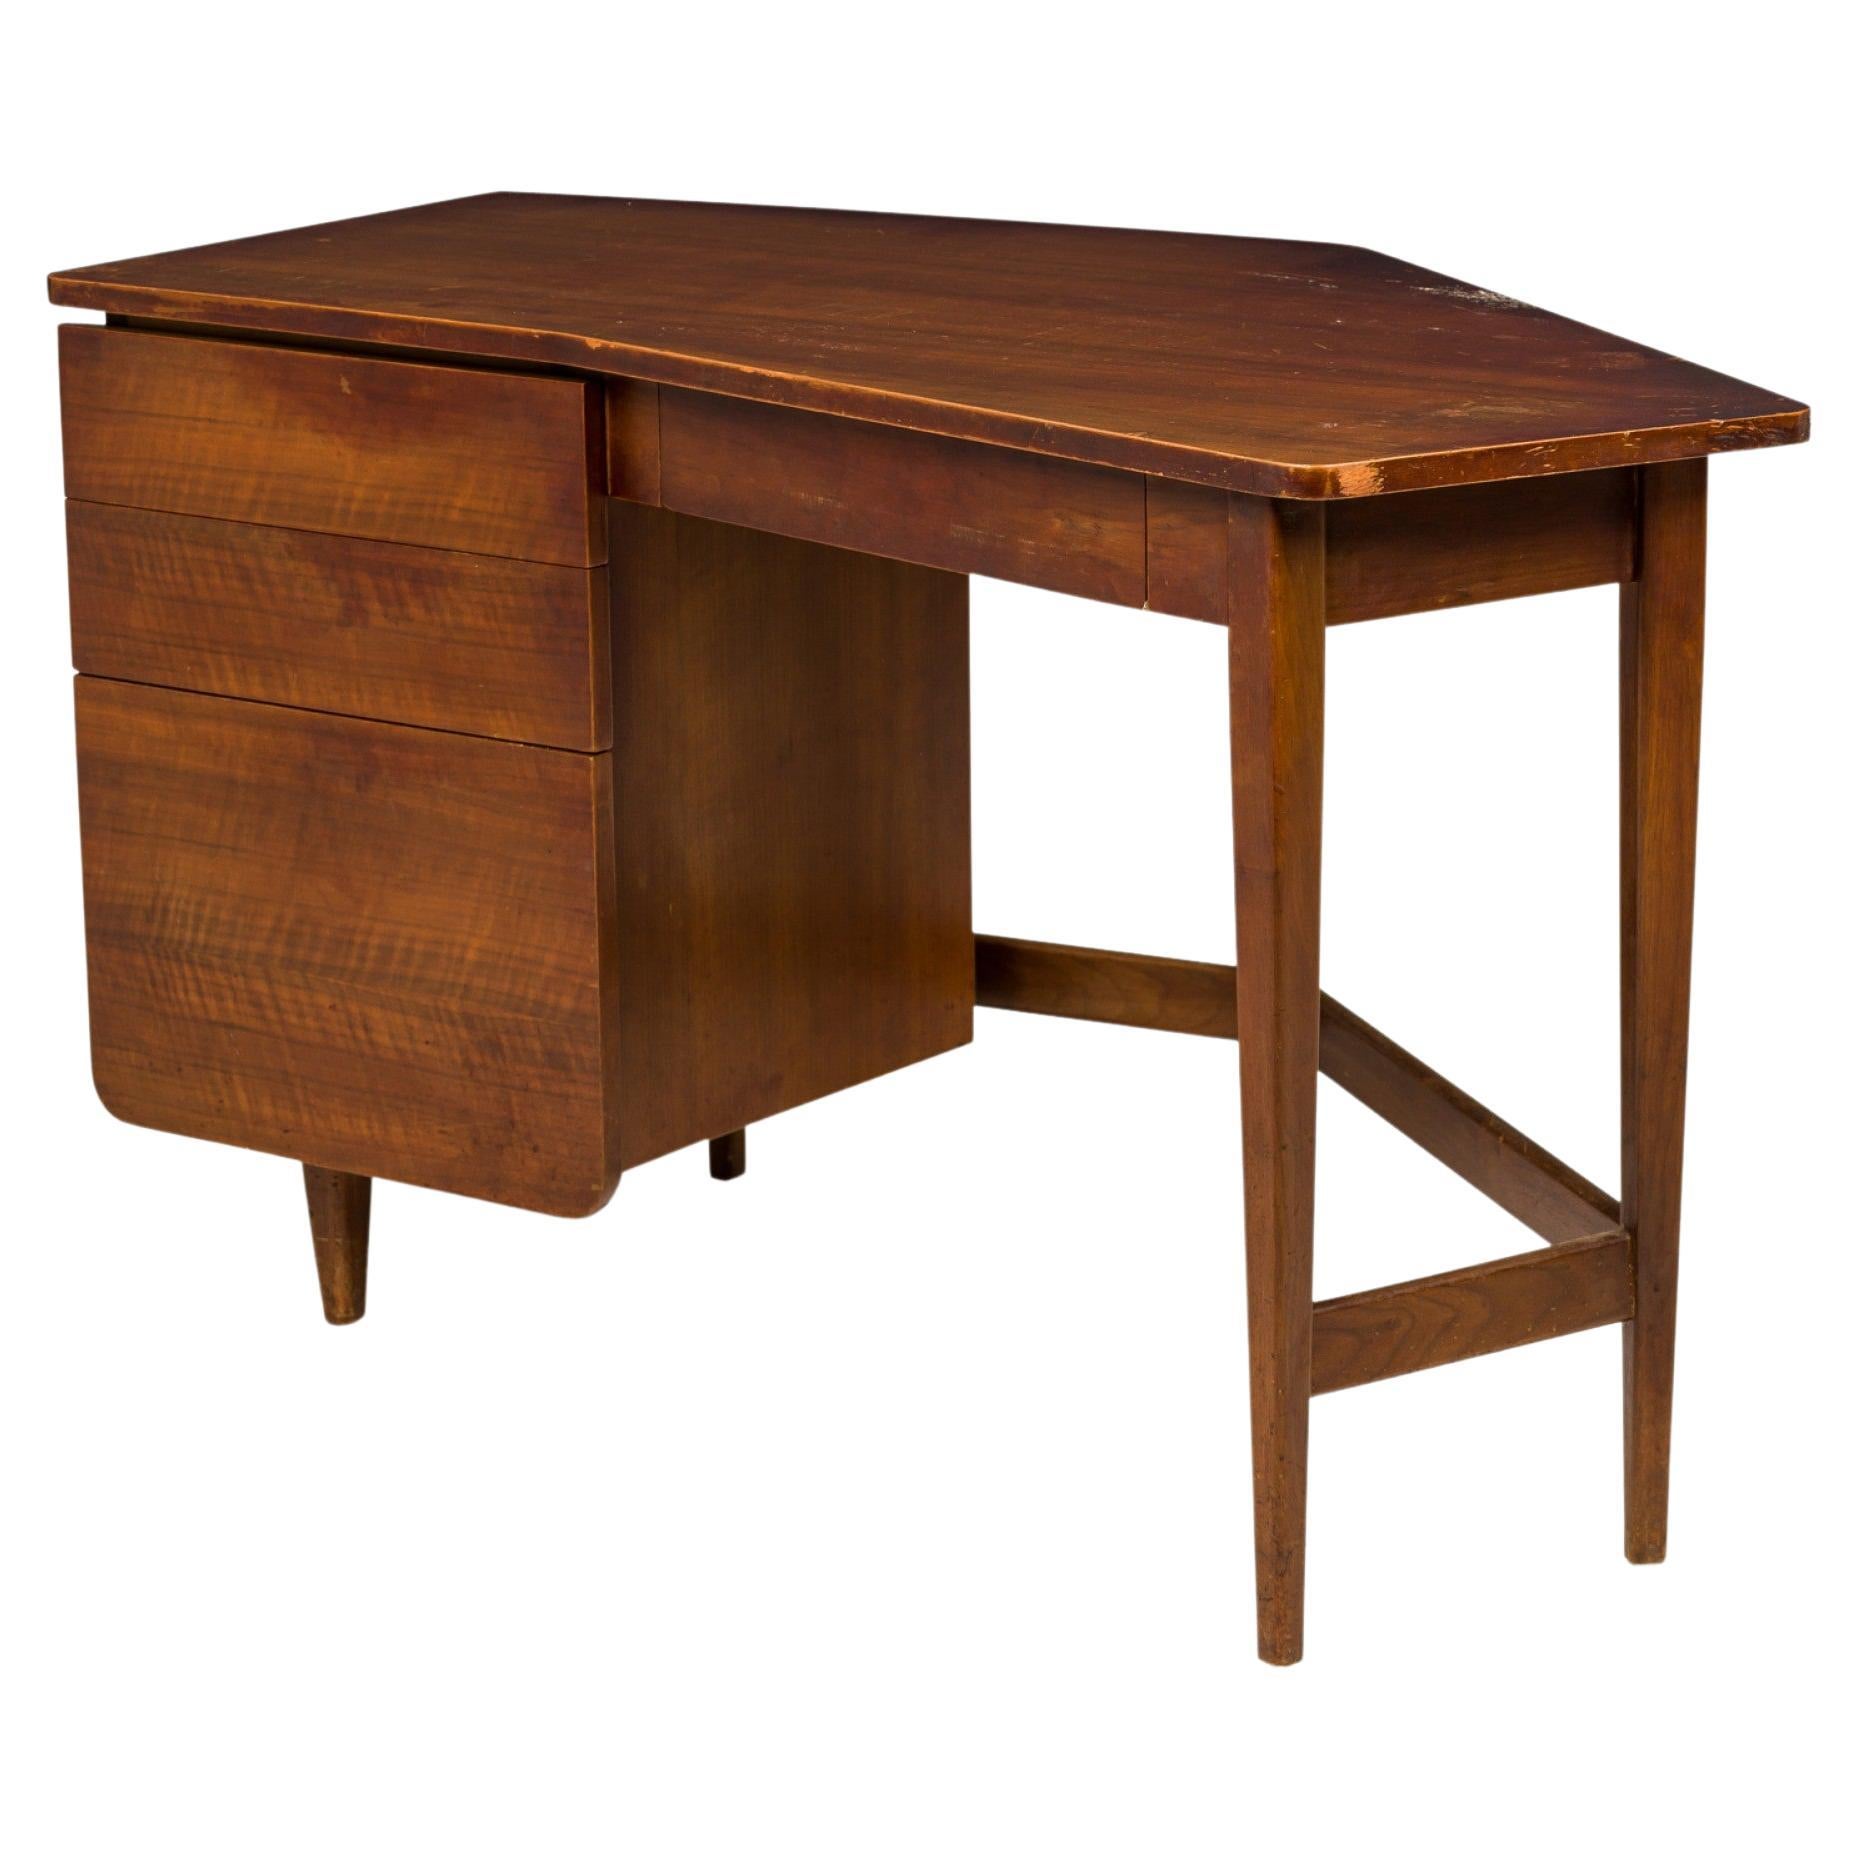 Bertha Schaefer for Singer & Sons American Mid-Century Angle Top Writing Desk For Sale